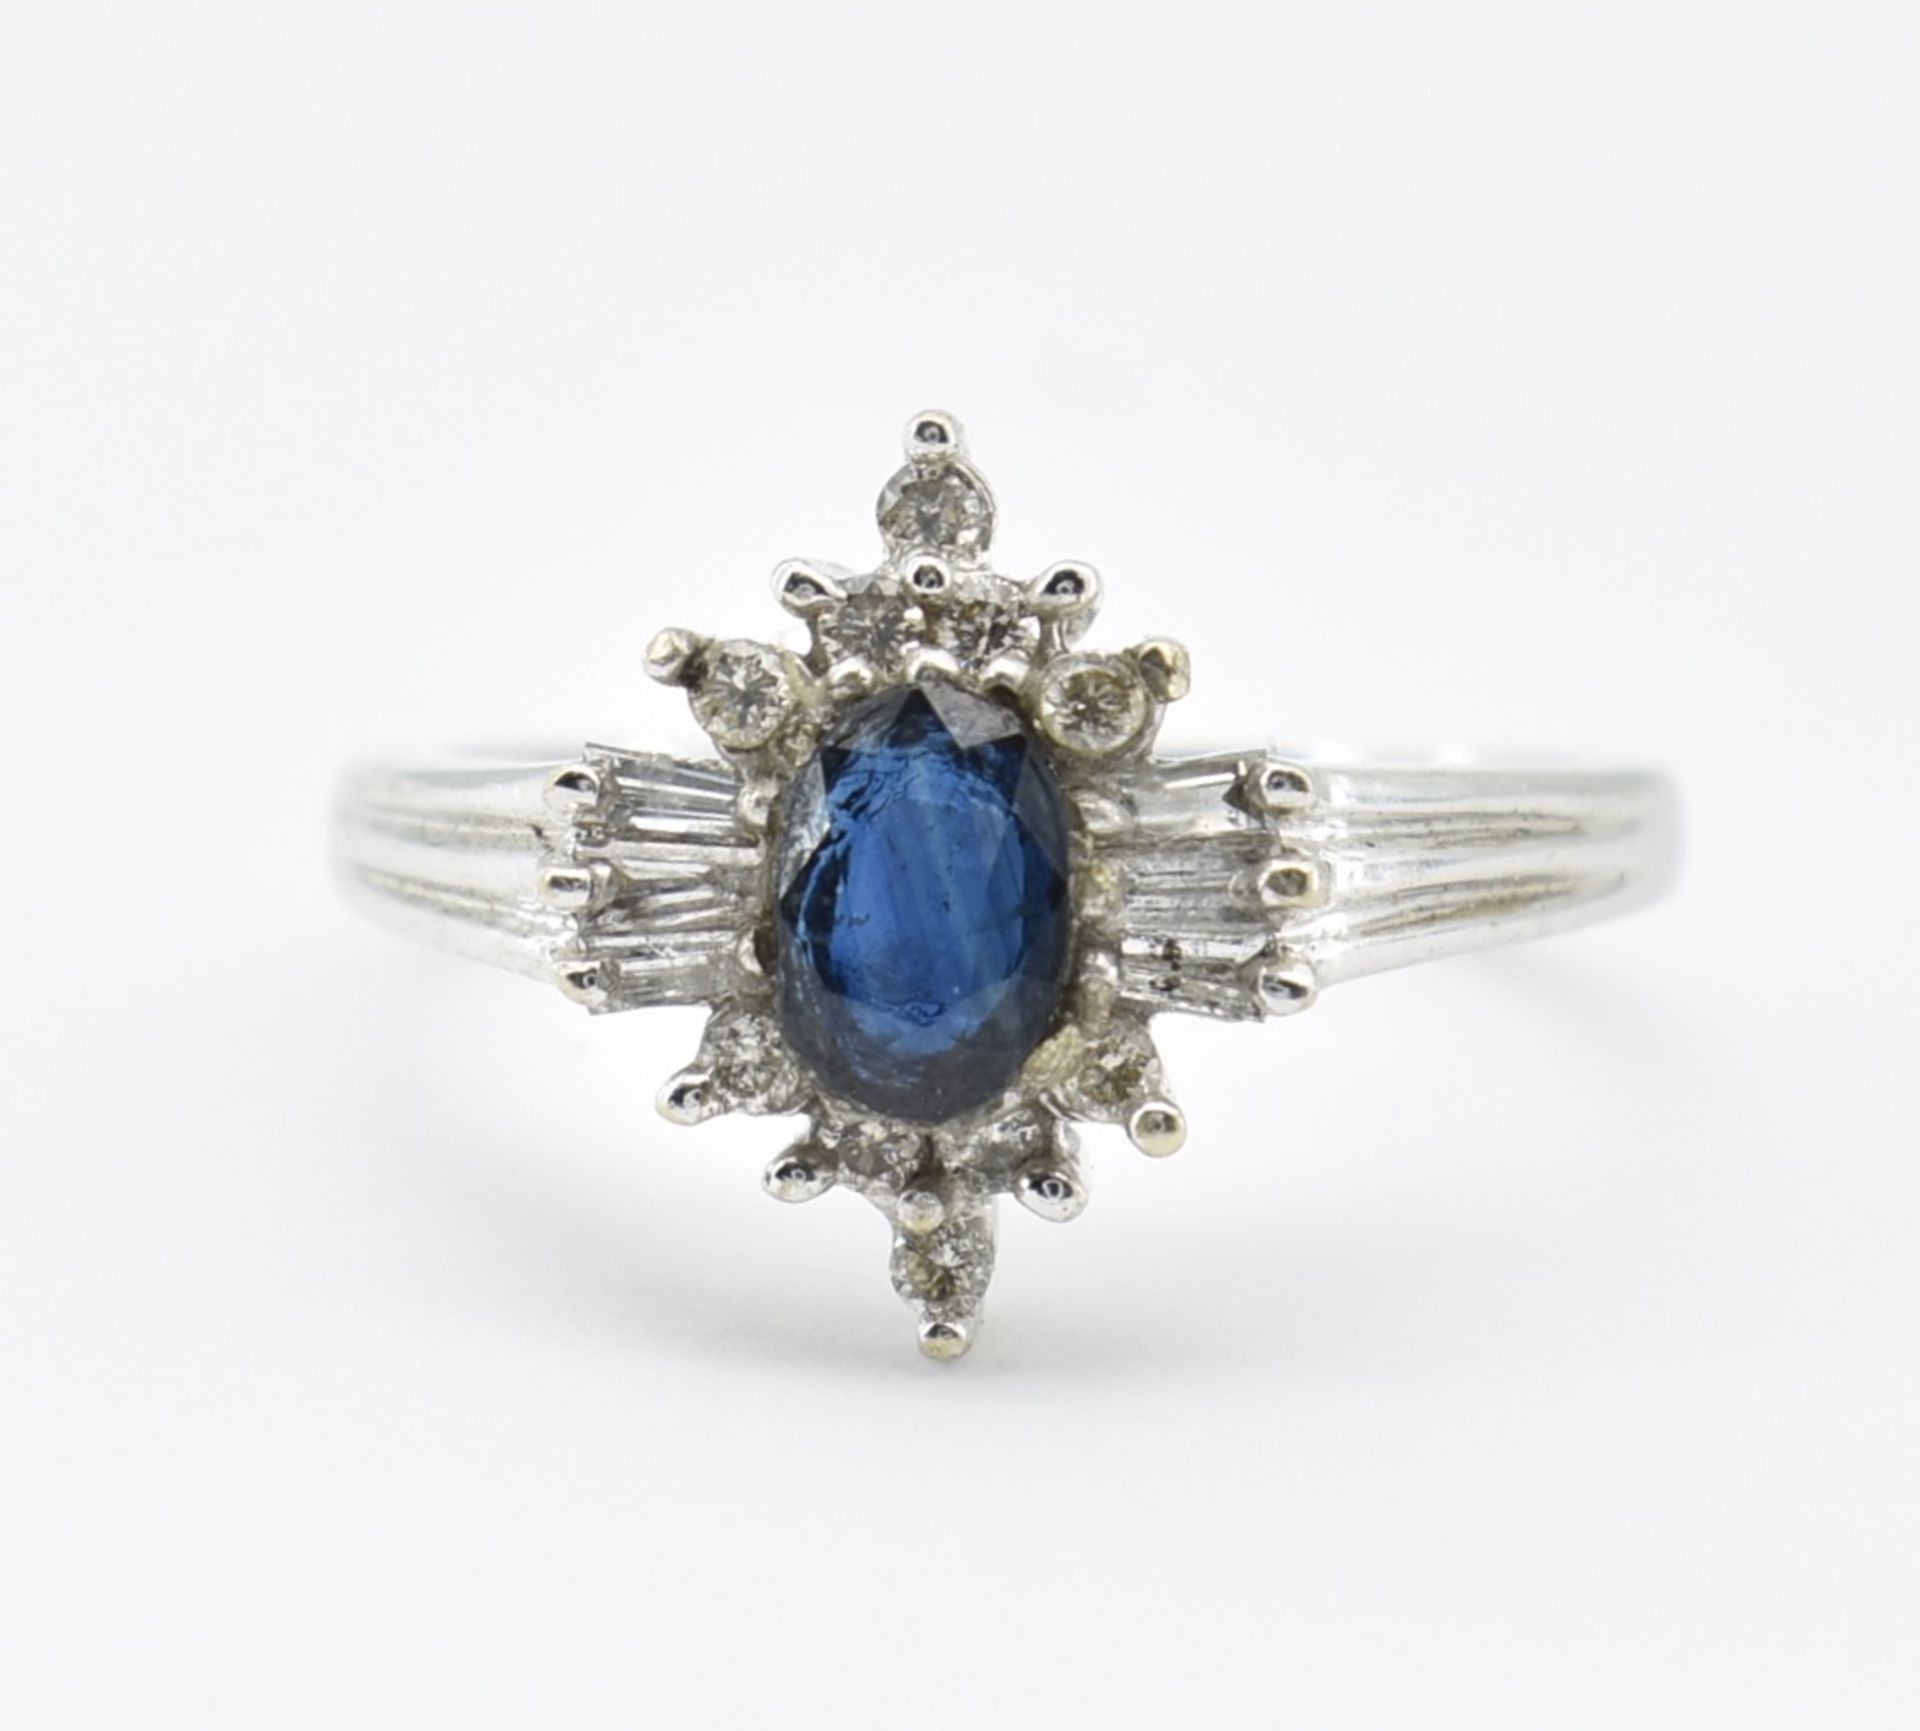 HALLMARKED 9CT WHITE GOLD SAPPHIRE & DIAMOND COCKTAIL RING - Image 2 of 4